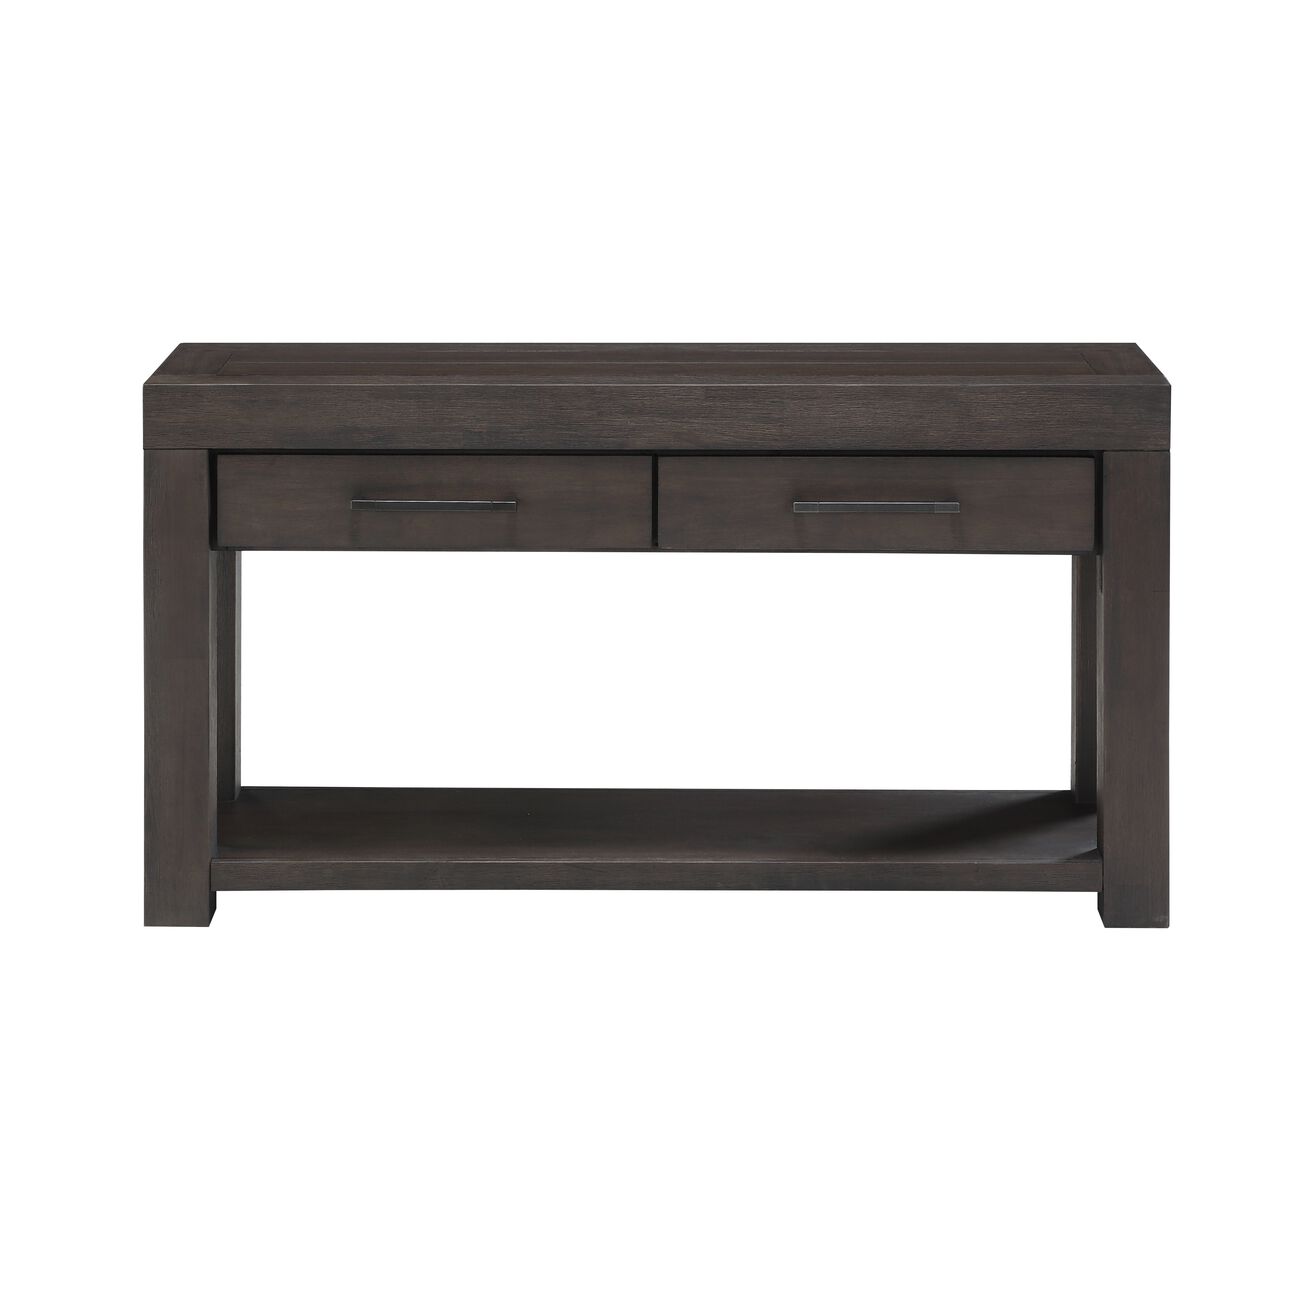 2 Drawer Wooden Console Table with Bar Handles and Open Shelf, Brown